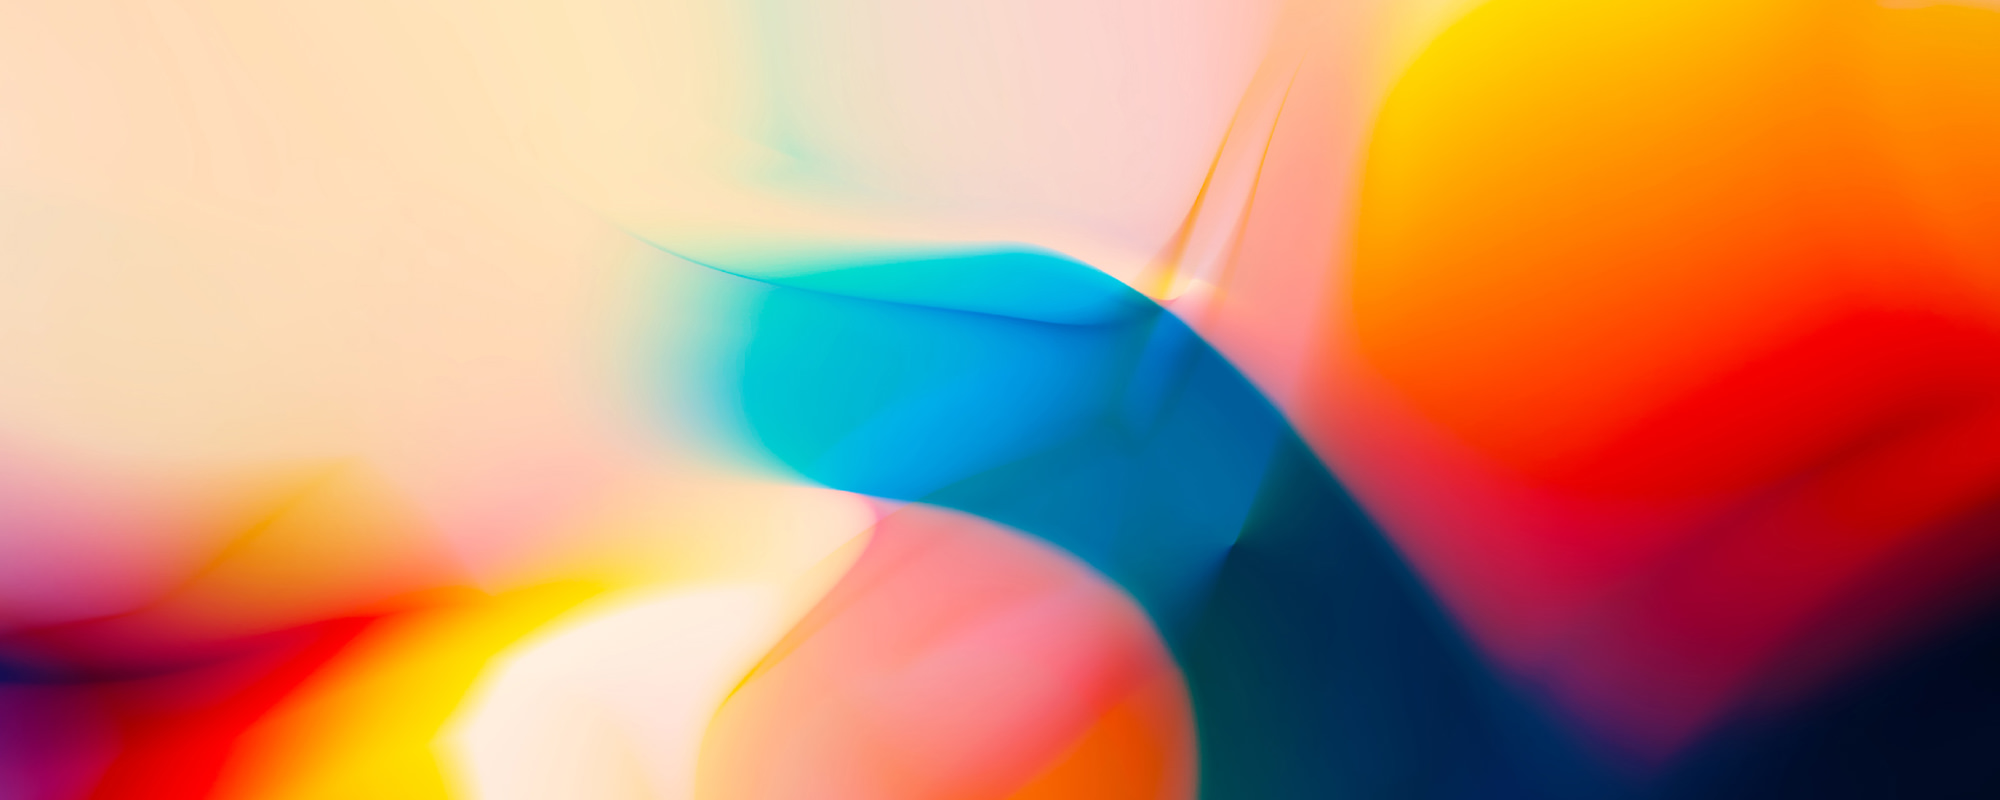 creative color abstract background